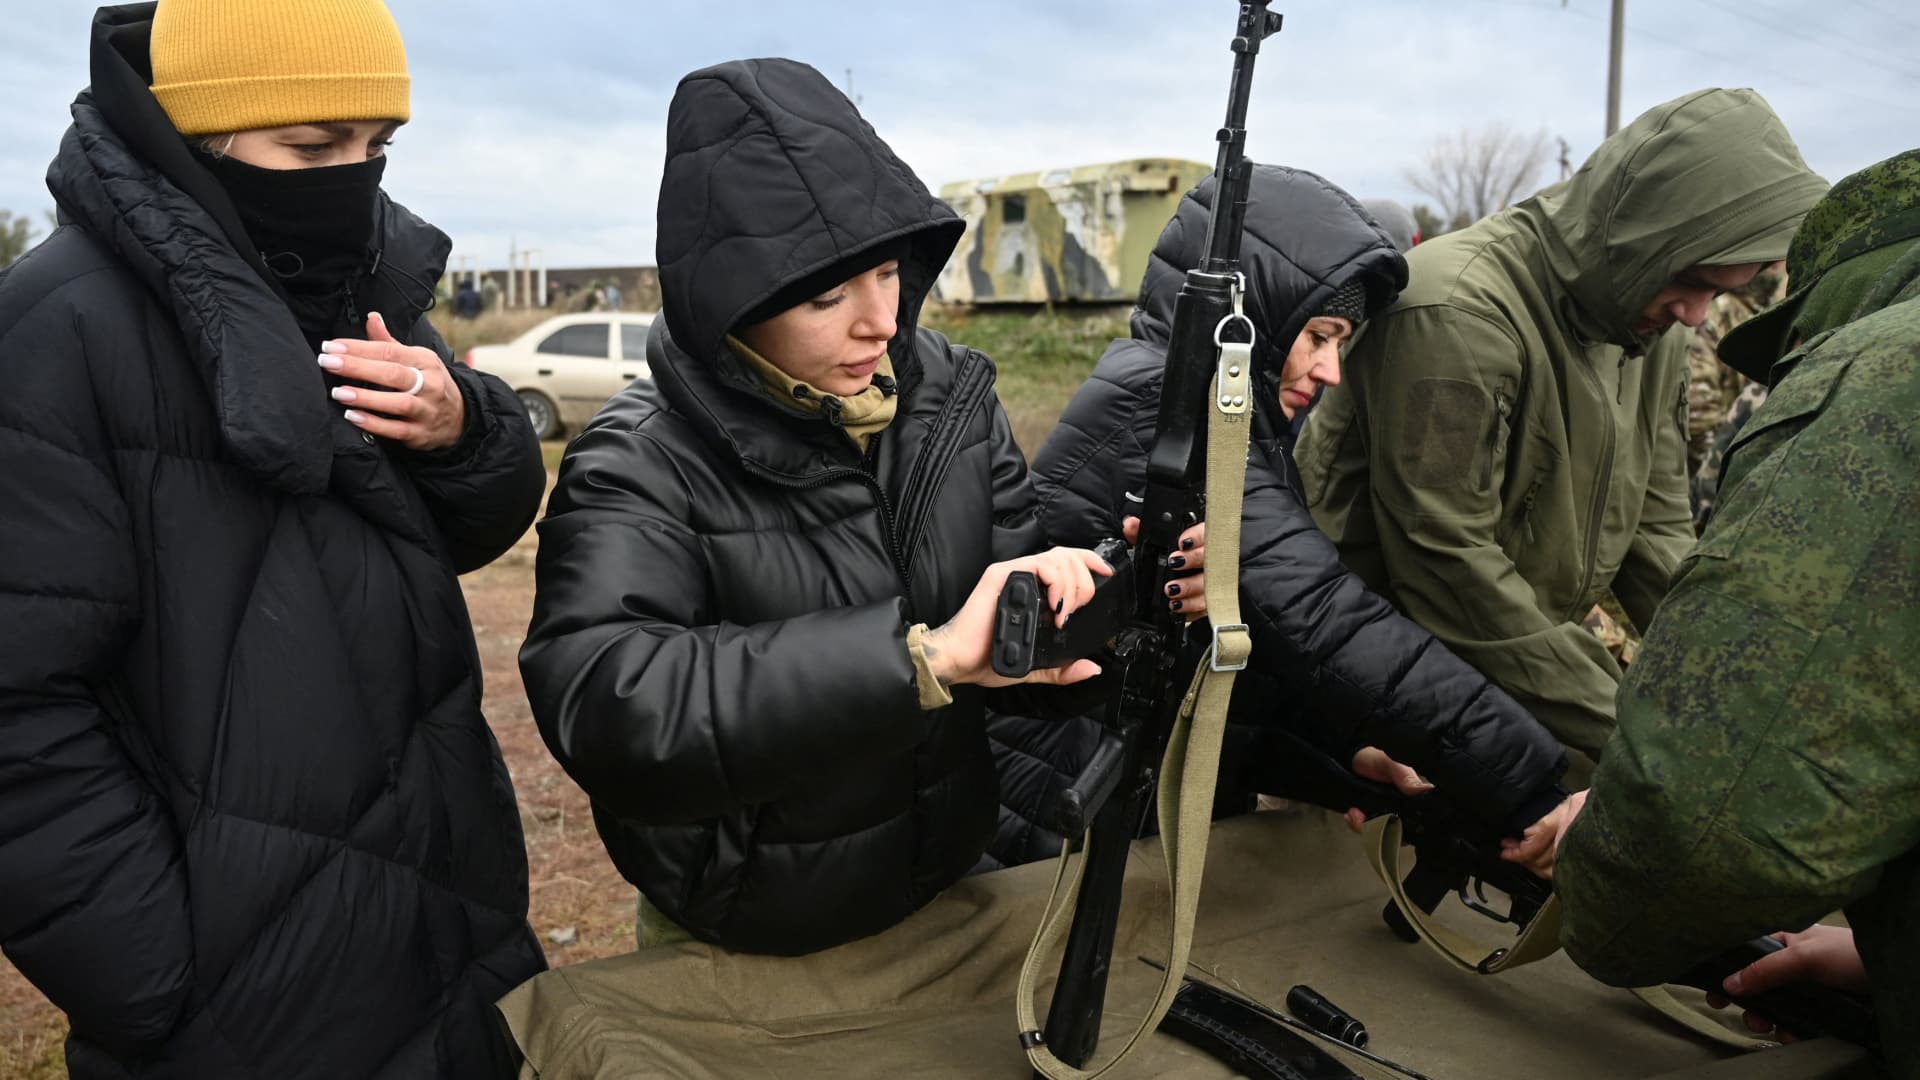 Participants assemble rifles during a combat training session for civilians organised by local authorities at a range in Rostov Region, Russia October 21, 2022.